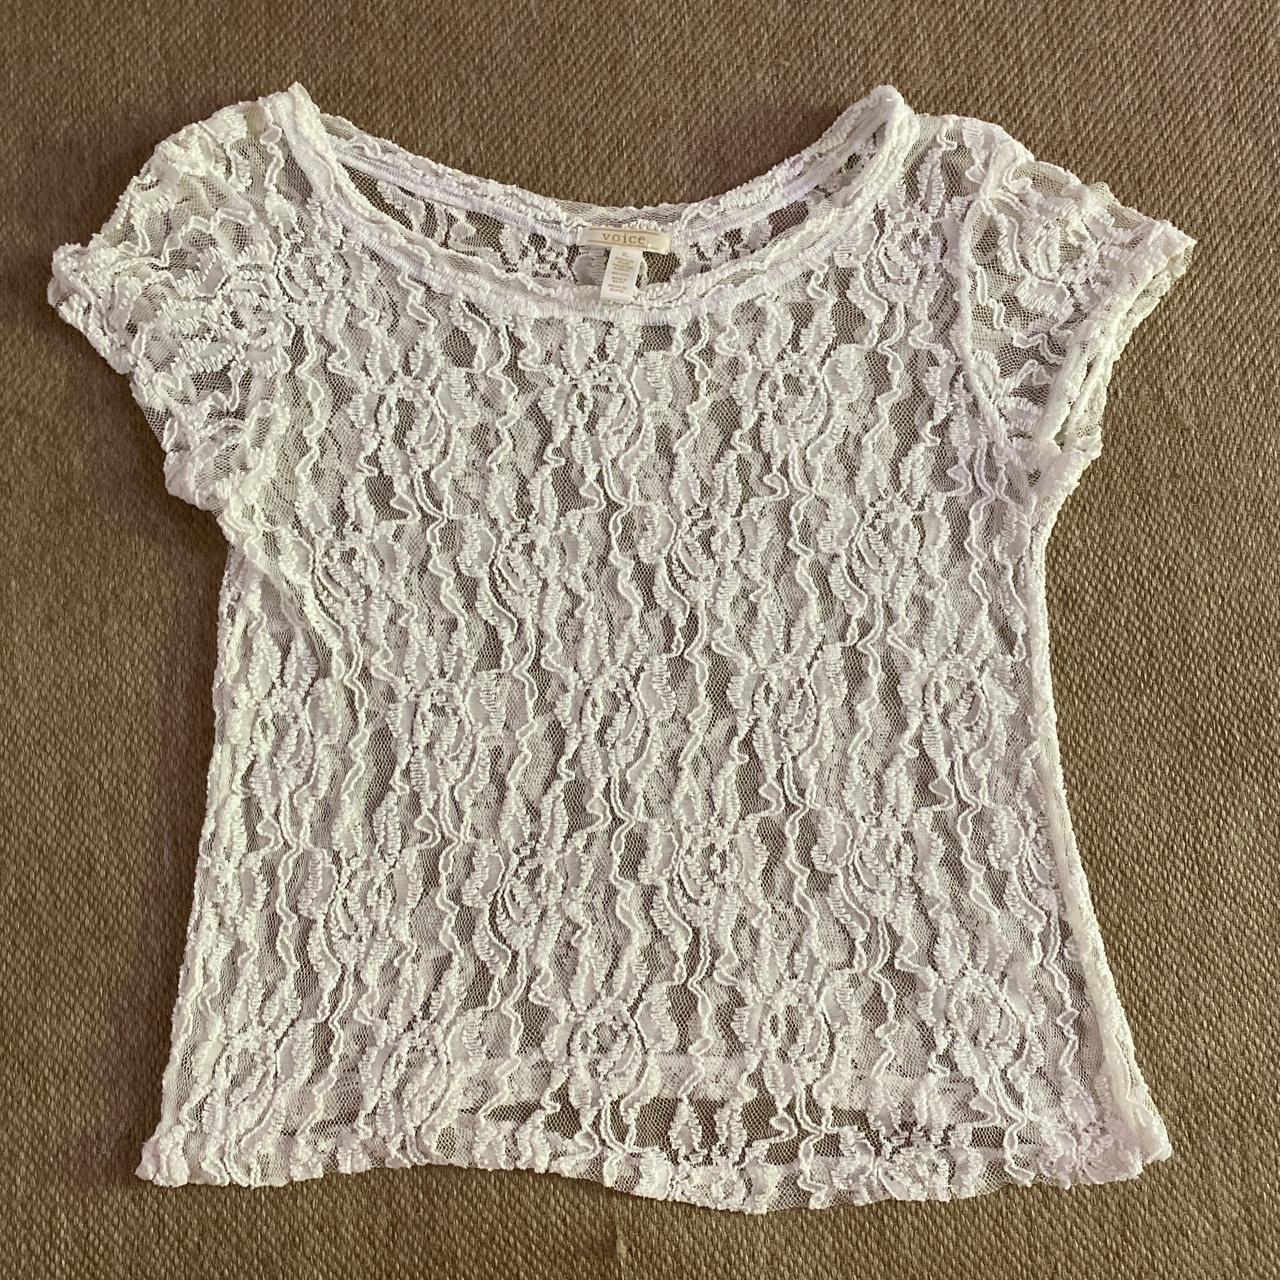 Beautiful sheer lace coquette top. Cottage core... - Depop